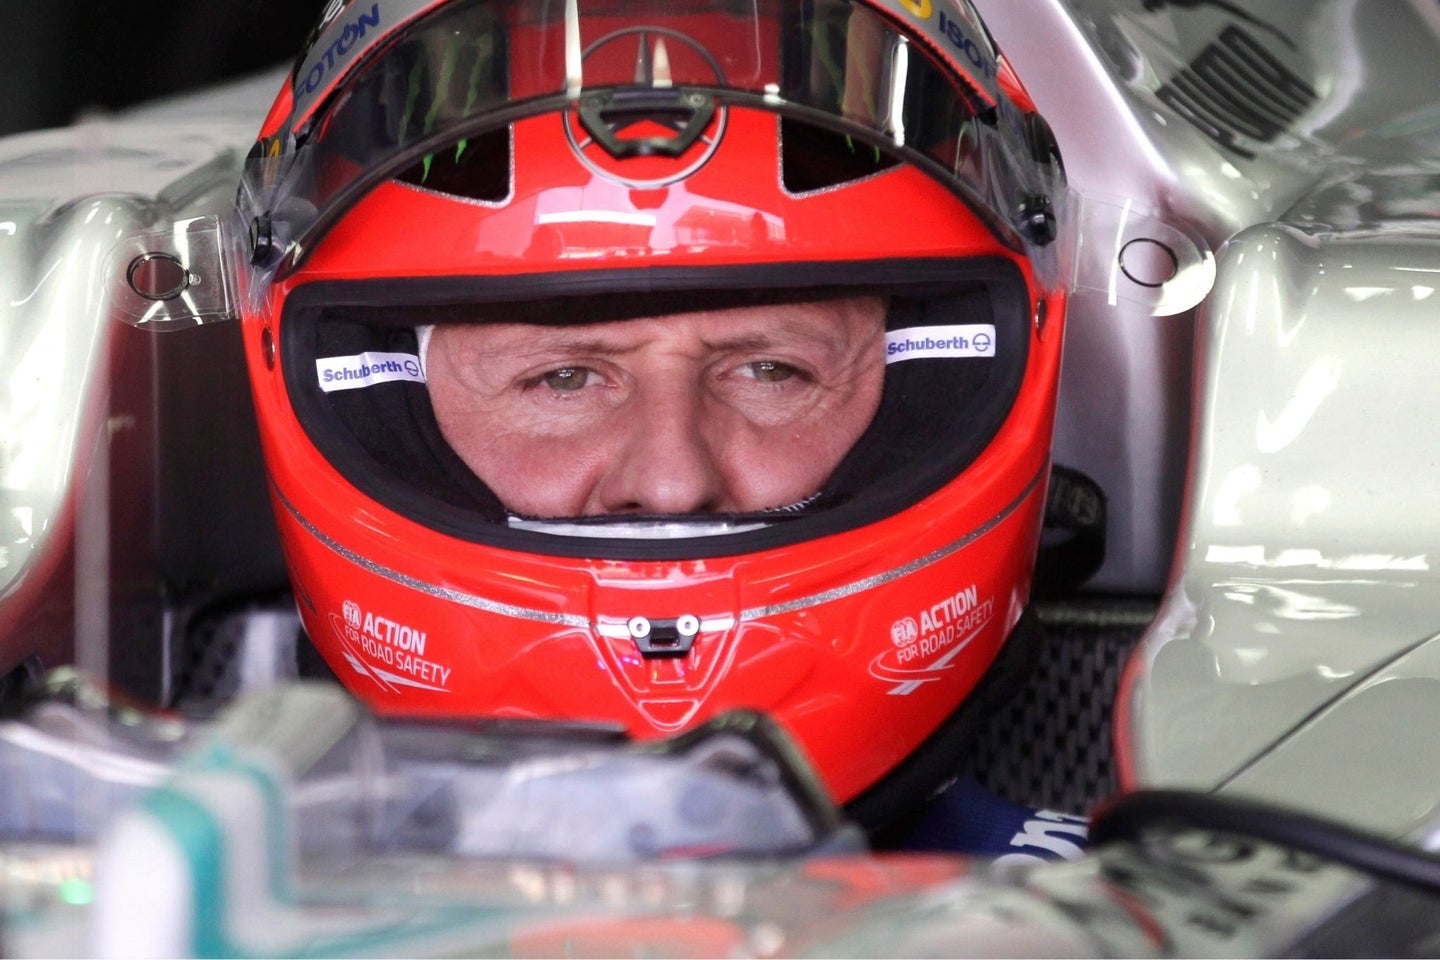 Get Your First Look at Netflix’s Michael Schumacher Documentary Here